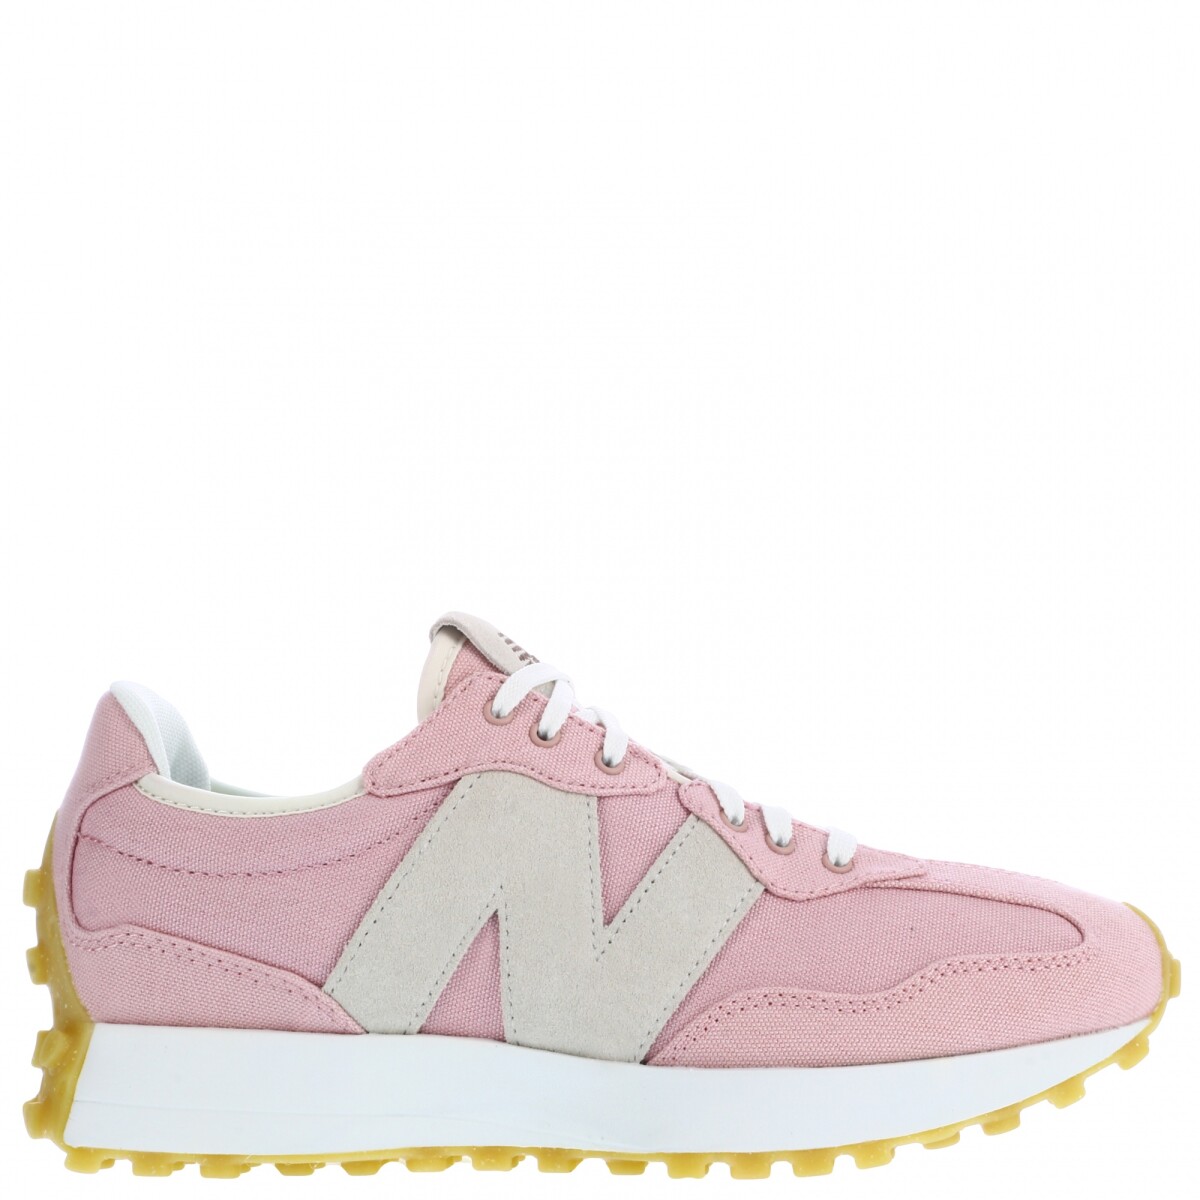 Life Style Wns New Balance - Rosa/Beige 